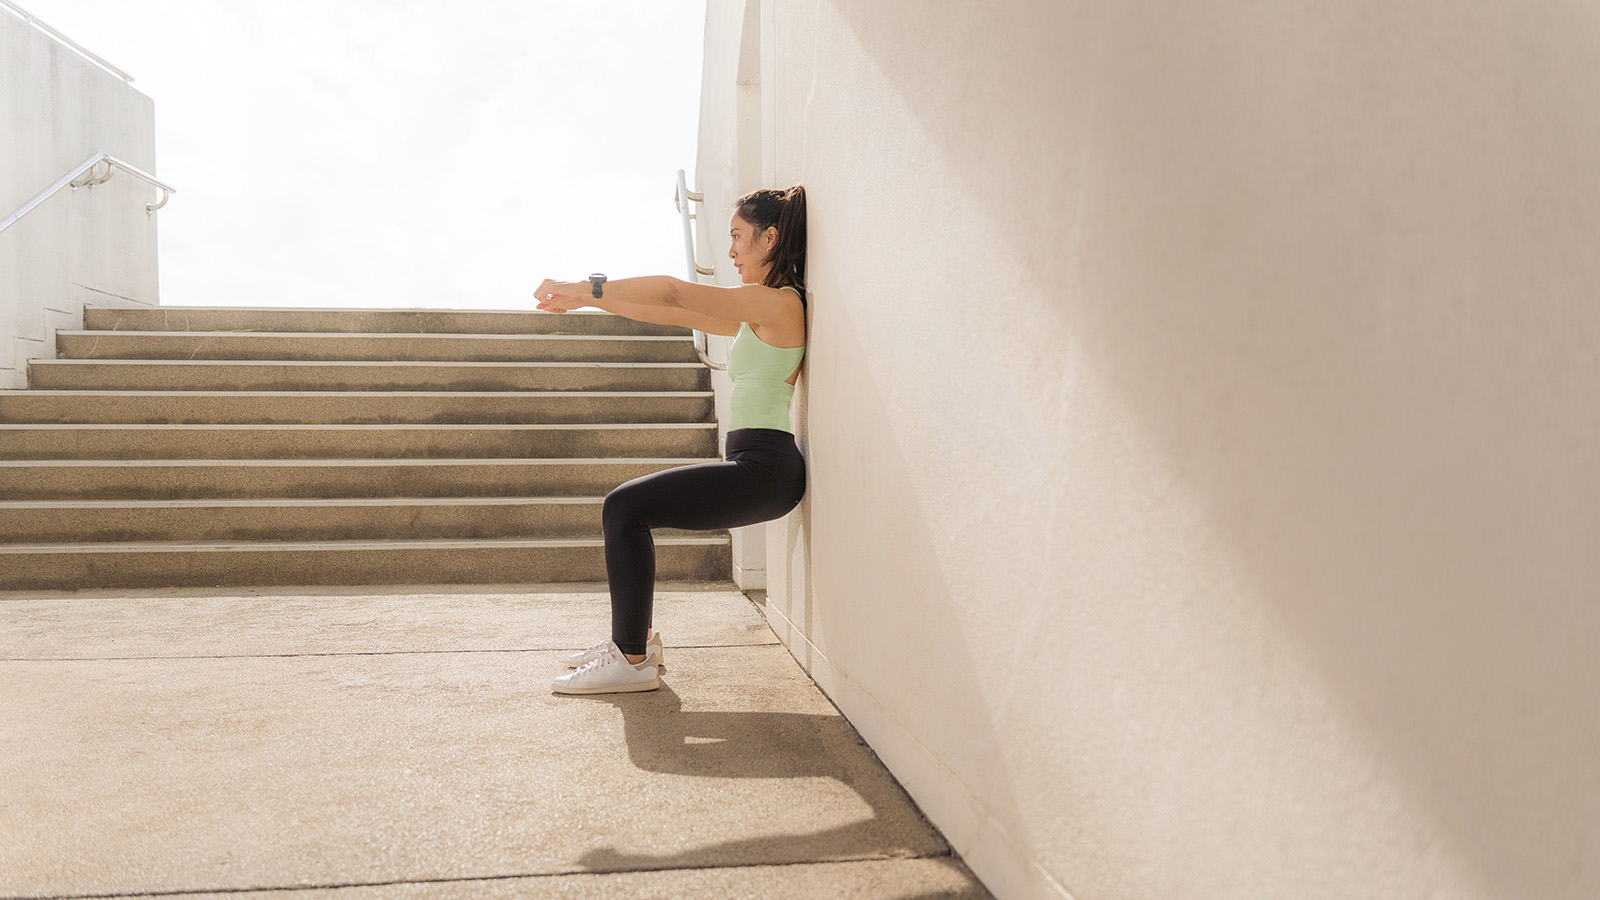 10-MINUTE WALL PILATES: Quick And Simple Wall Exercises To Improve Posture,  Build Balance & Increase Stability__ Suitable For Seniors, Beginners 